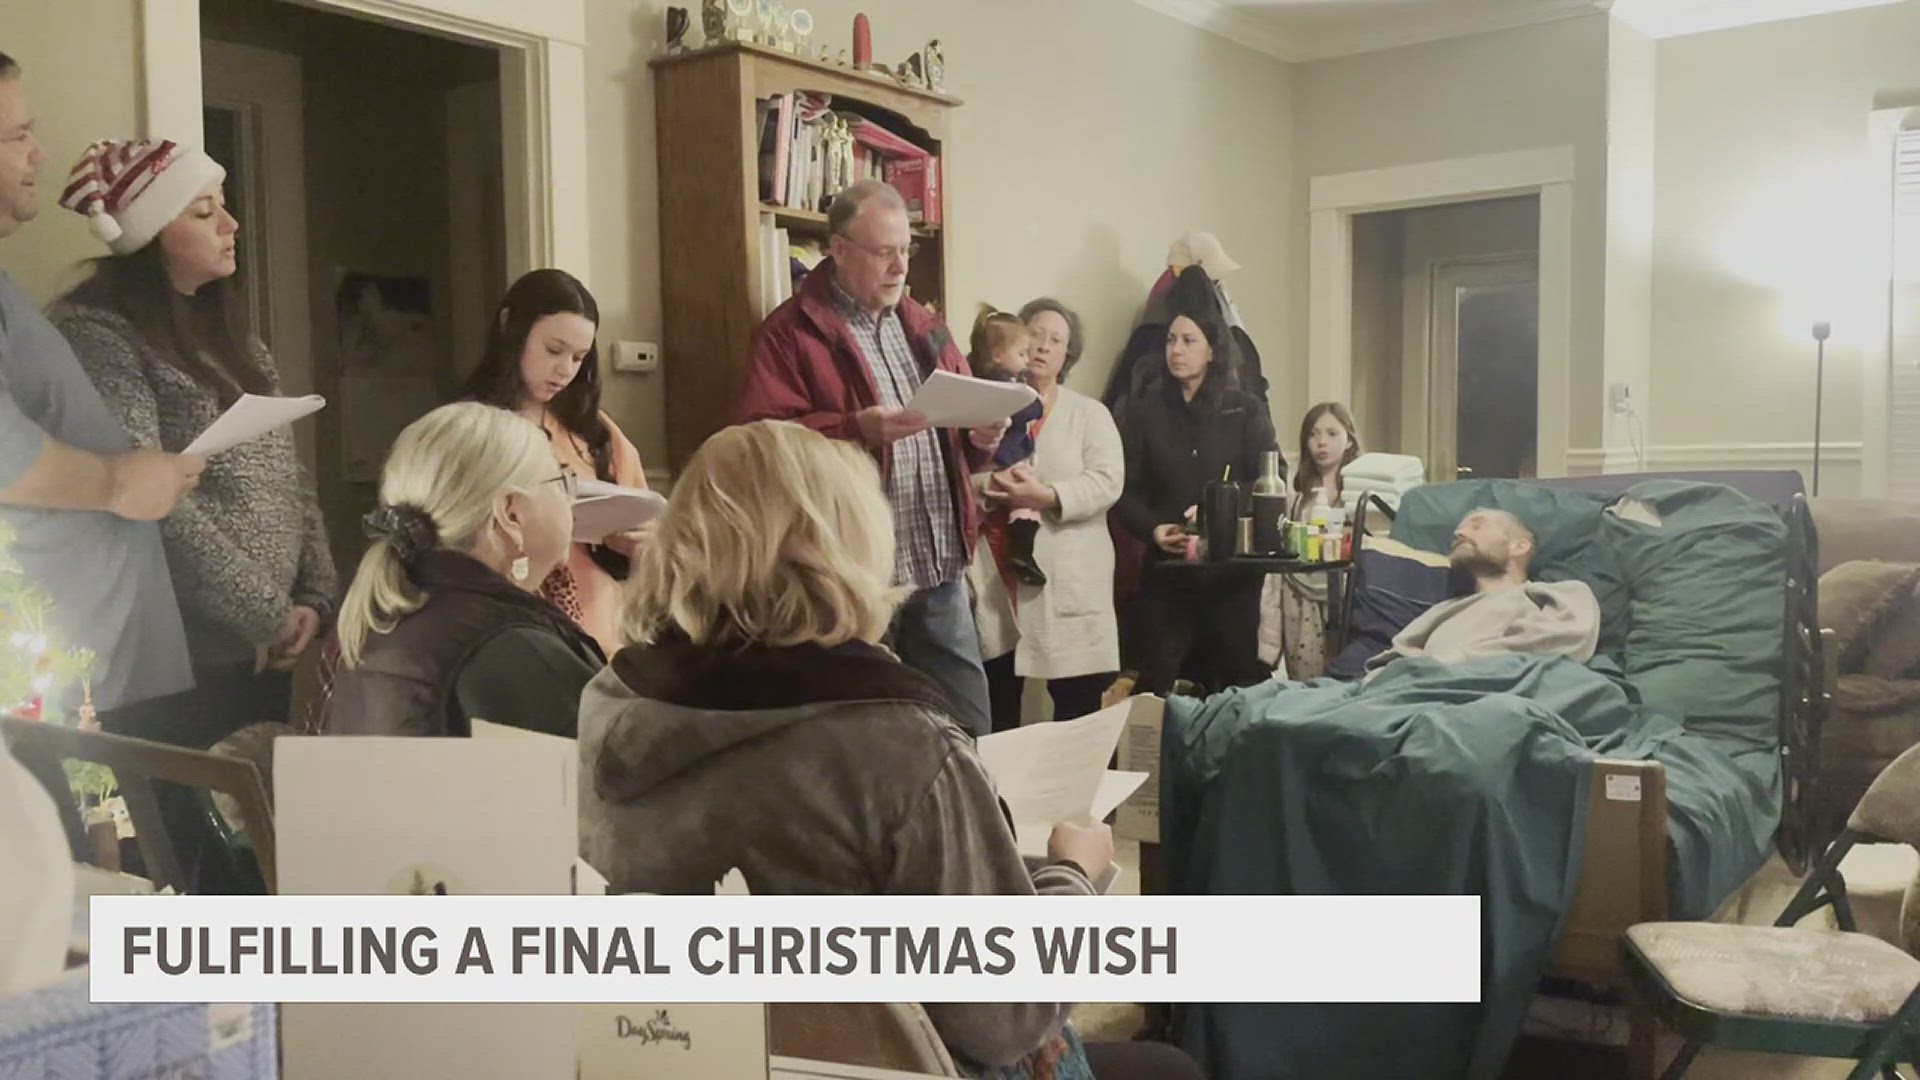 Cory Ziolkowski is in hospice care after battling cancer for years. His wife, Glenda, wanted to give him something special this holiday season.